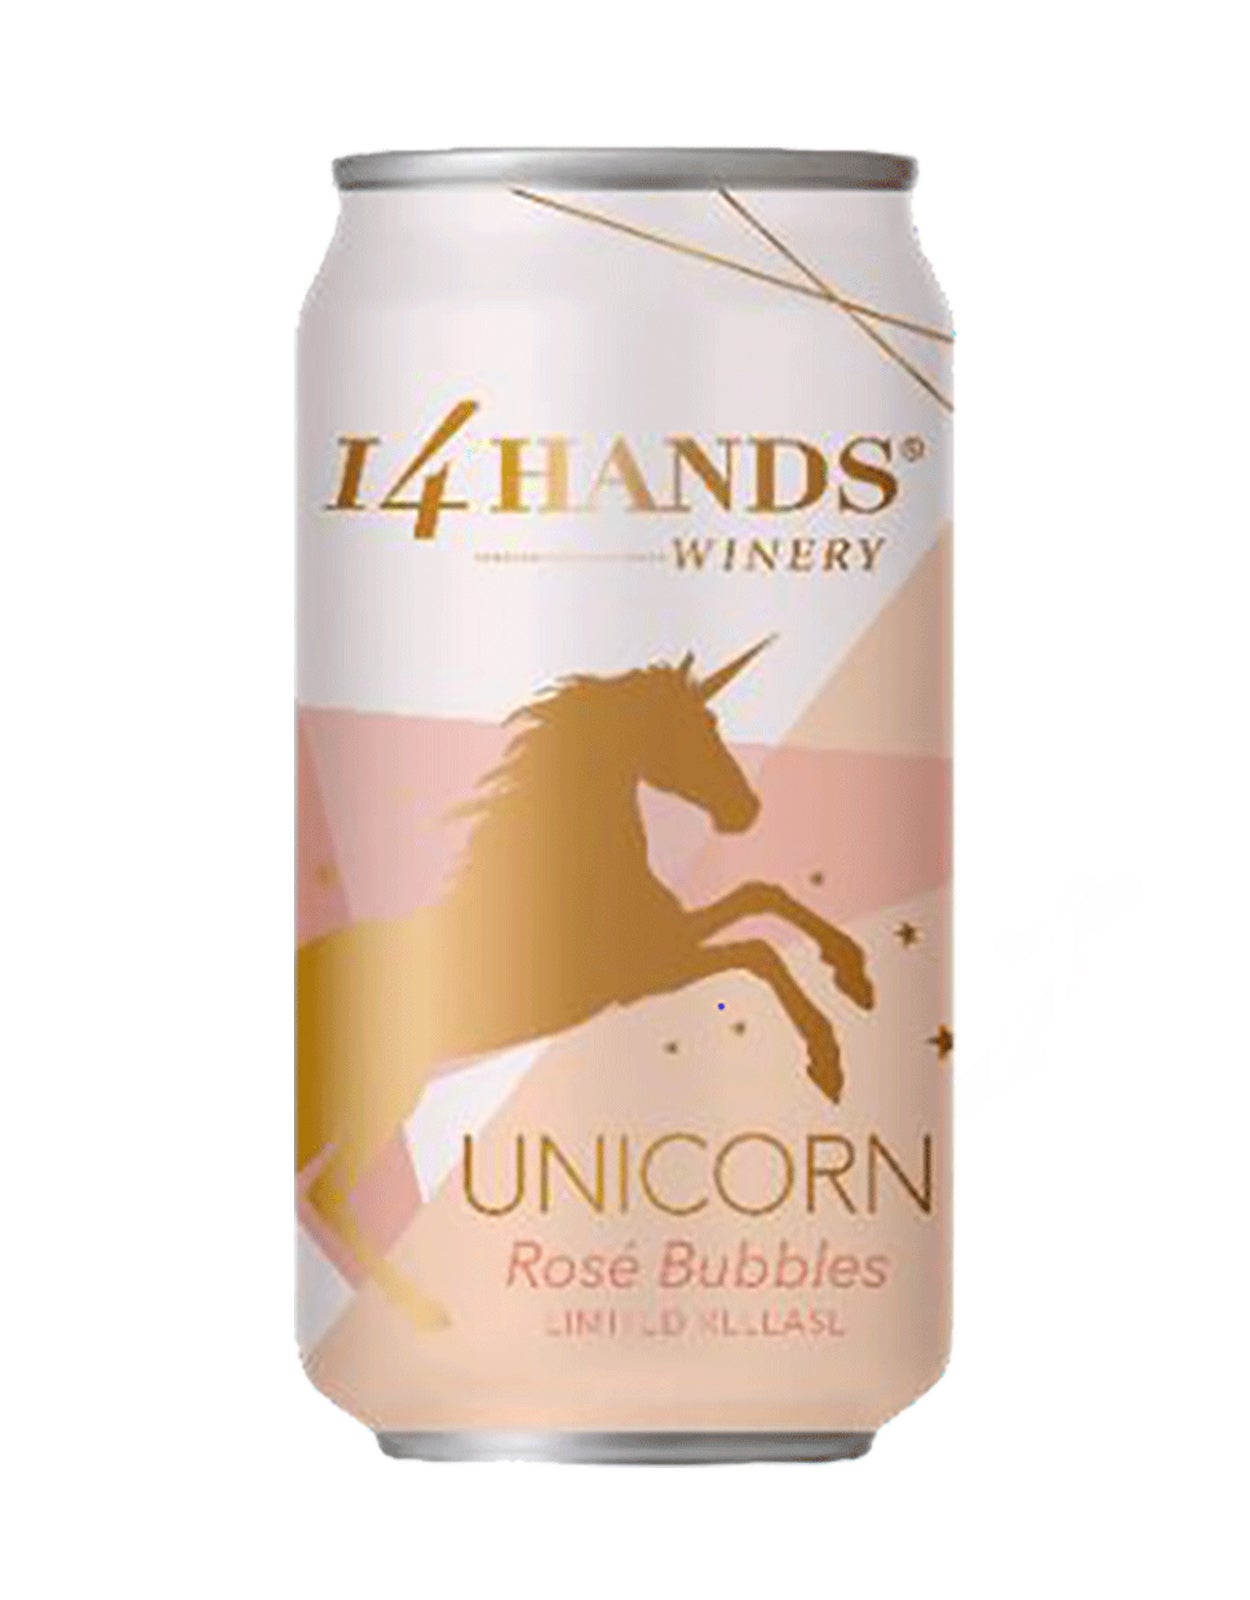 14 Hands Unicorn Rose Bubbles Can (NV) - 375 ml